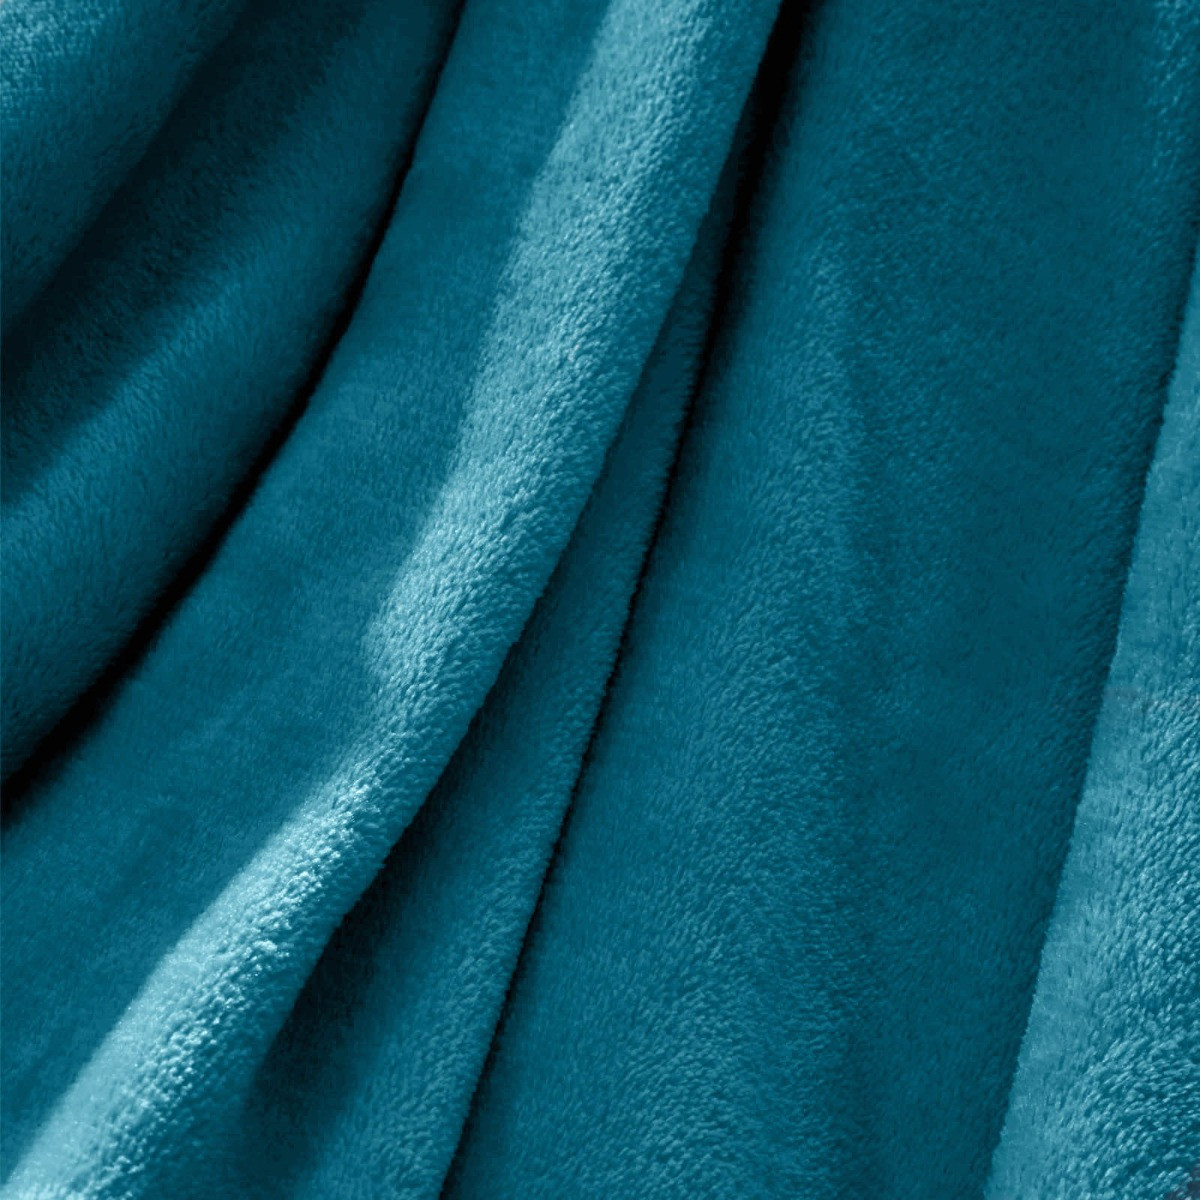 Brentfords Supersoft Throw, Turquoise - 120 x 150cm>